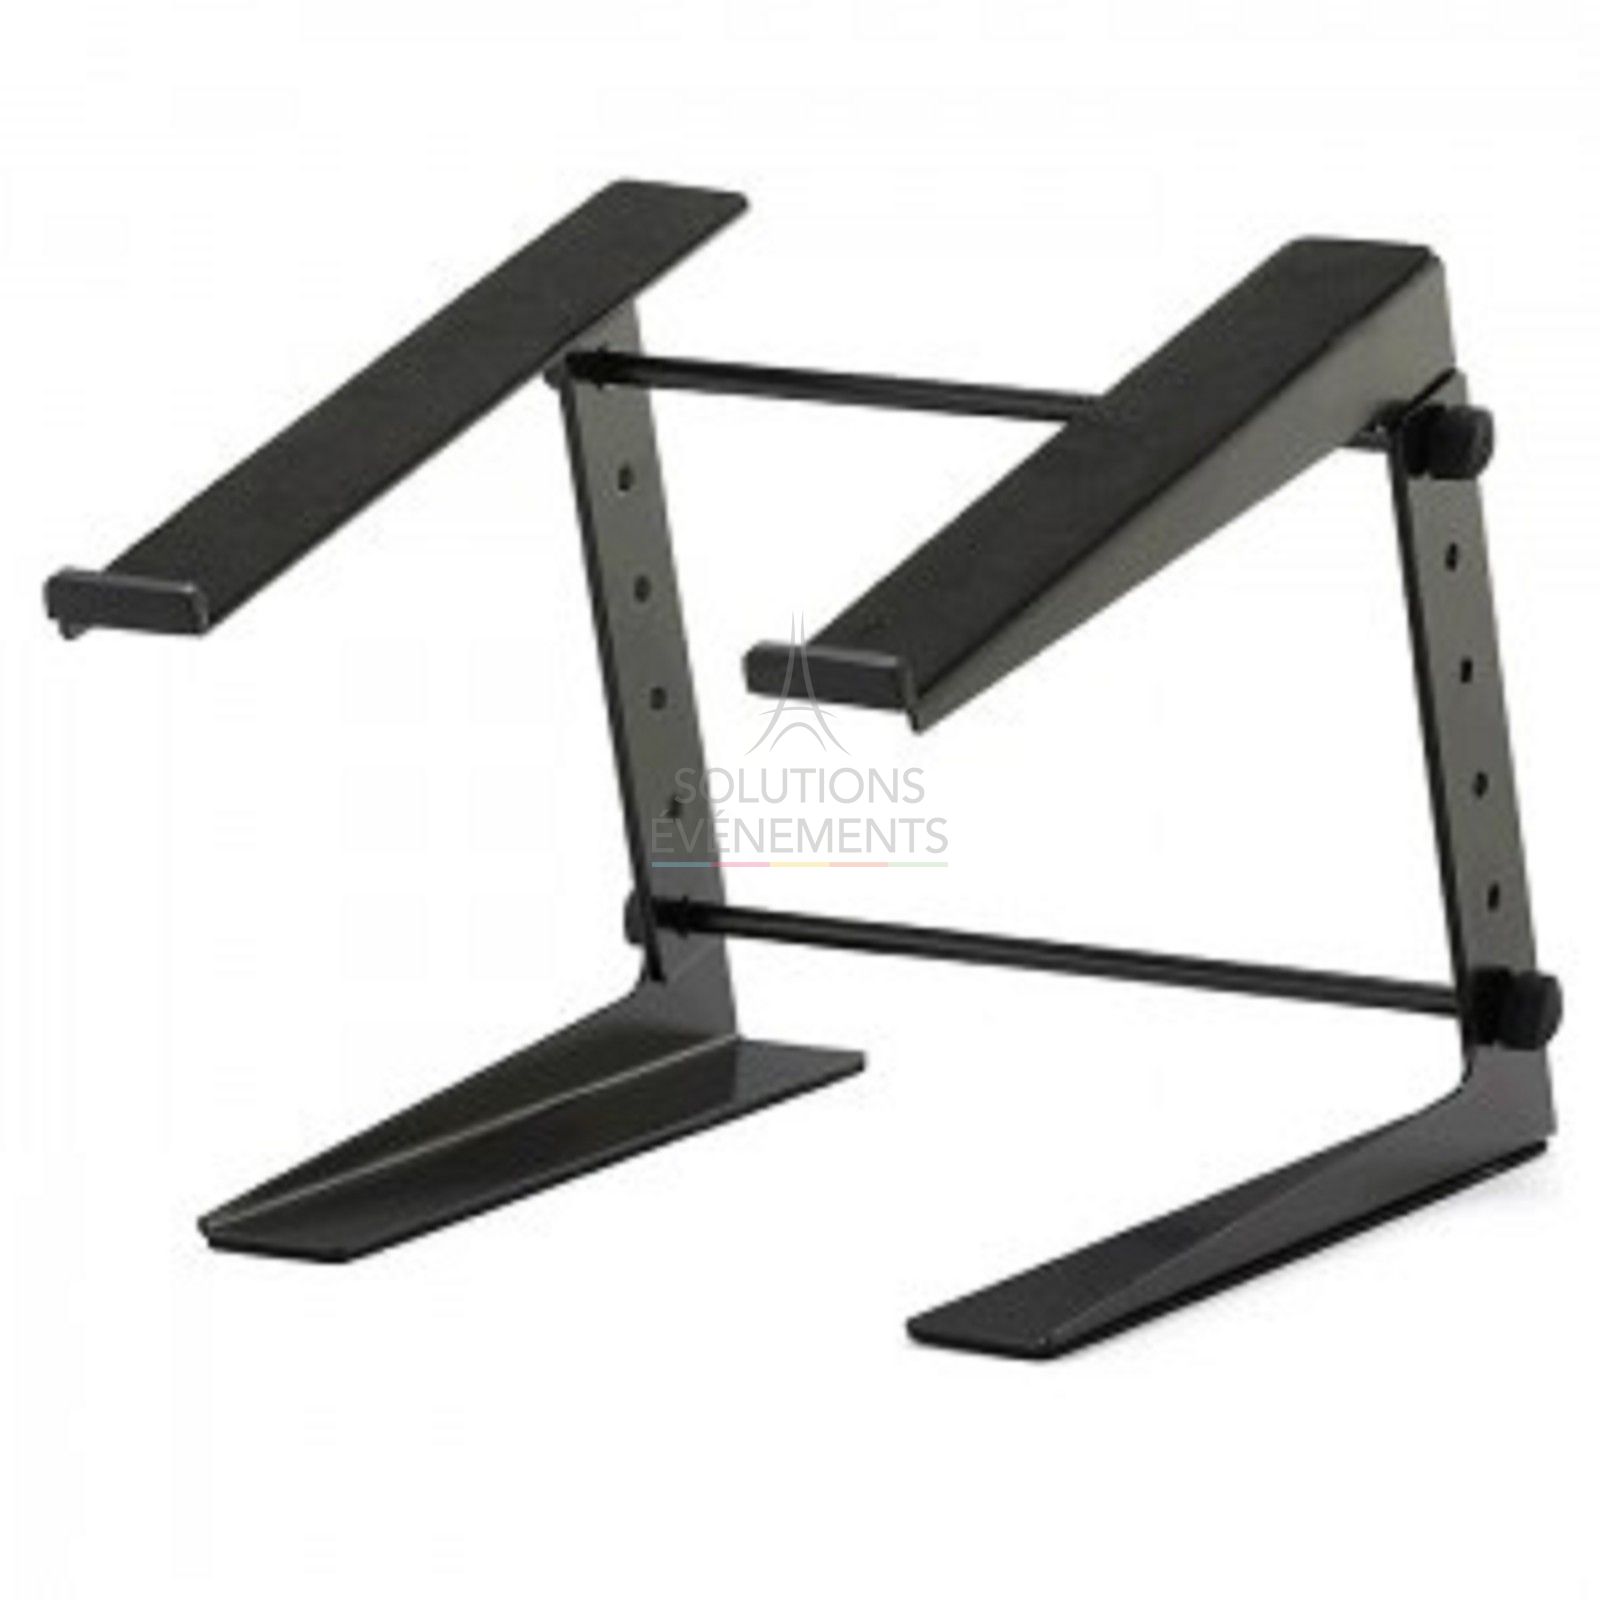 PC stand rental